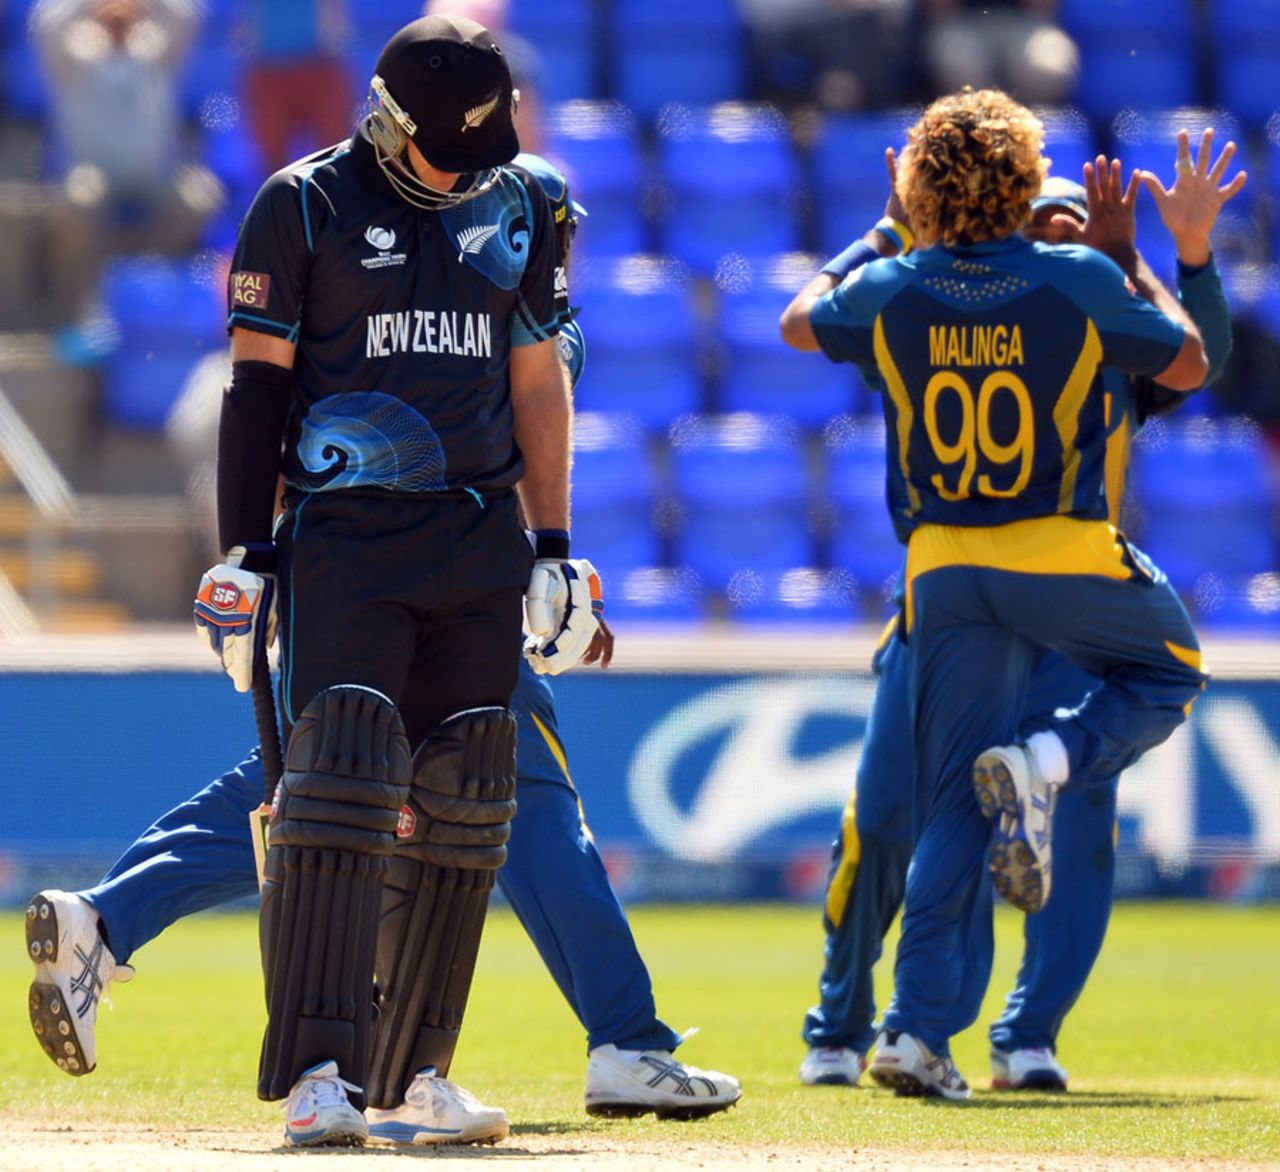 Daniel Vettori is disappointed after receiving a raw decision, New Zealand v Sri Lanka, Champions Trophy, Group A, Cardiff, June 9, 2013